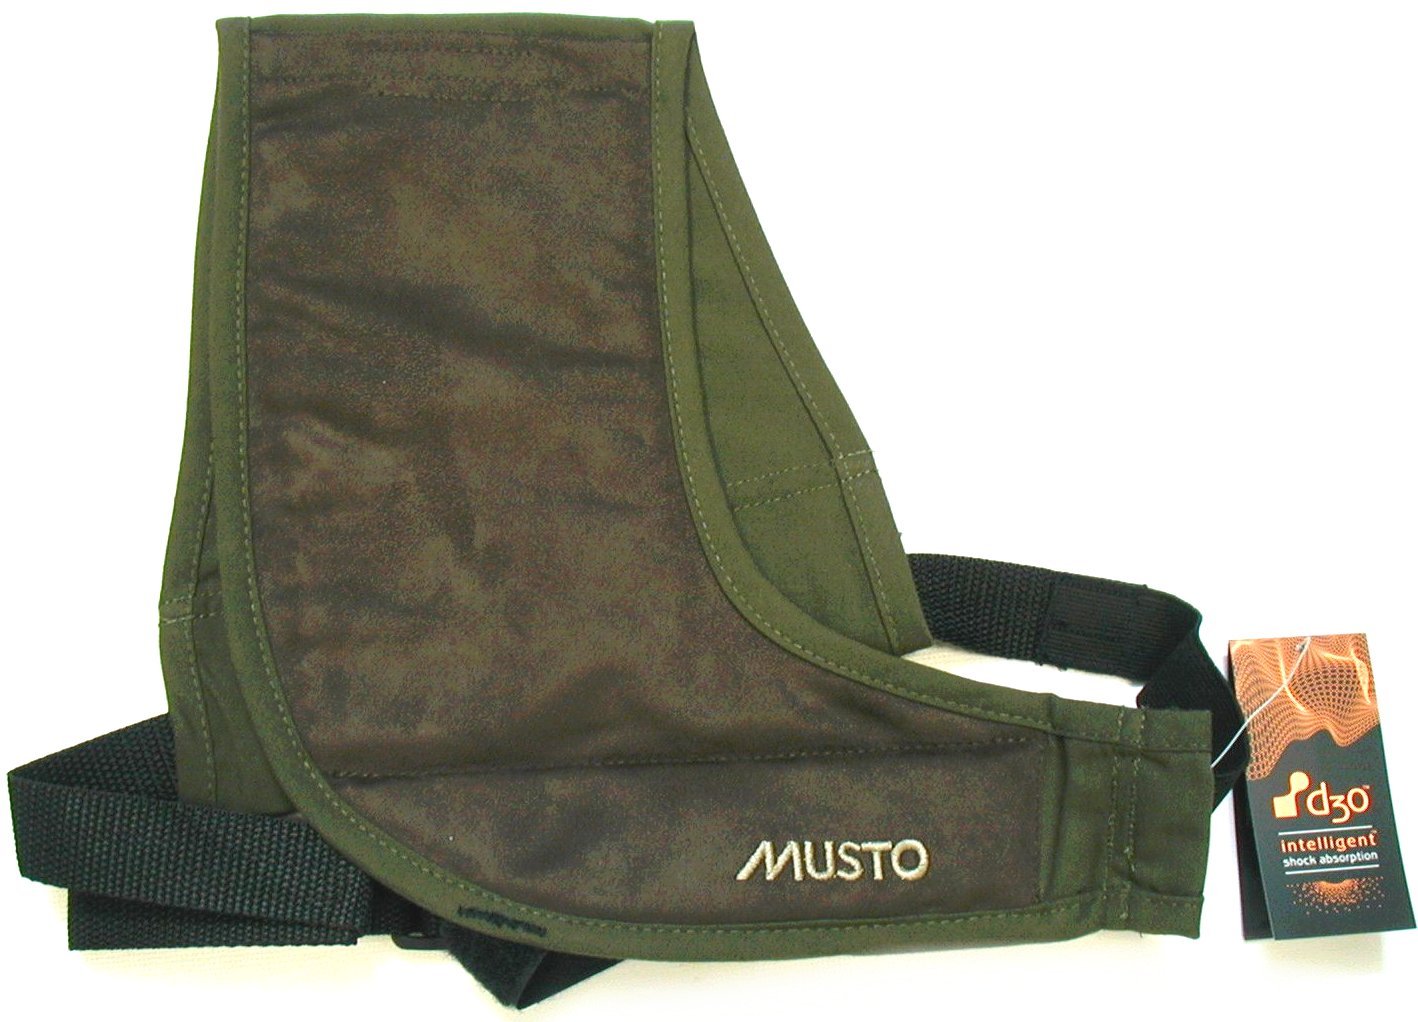 Musto D30 Recoil Reducing Shield Pad Shoulder Harness